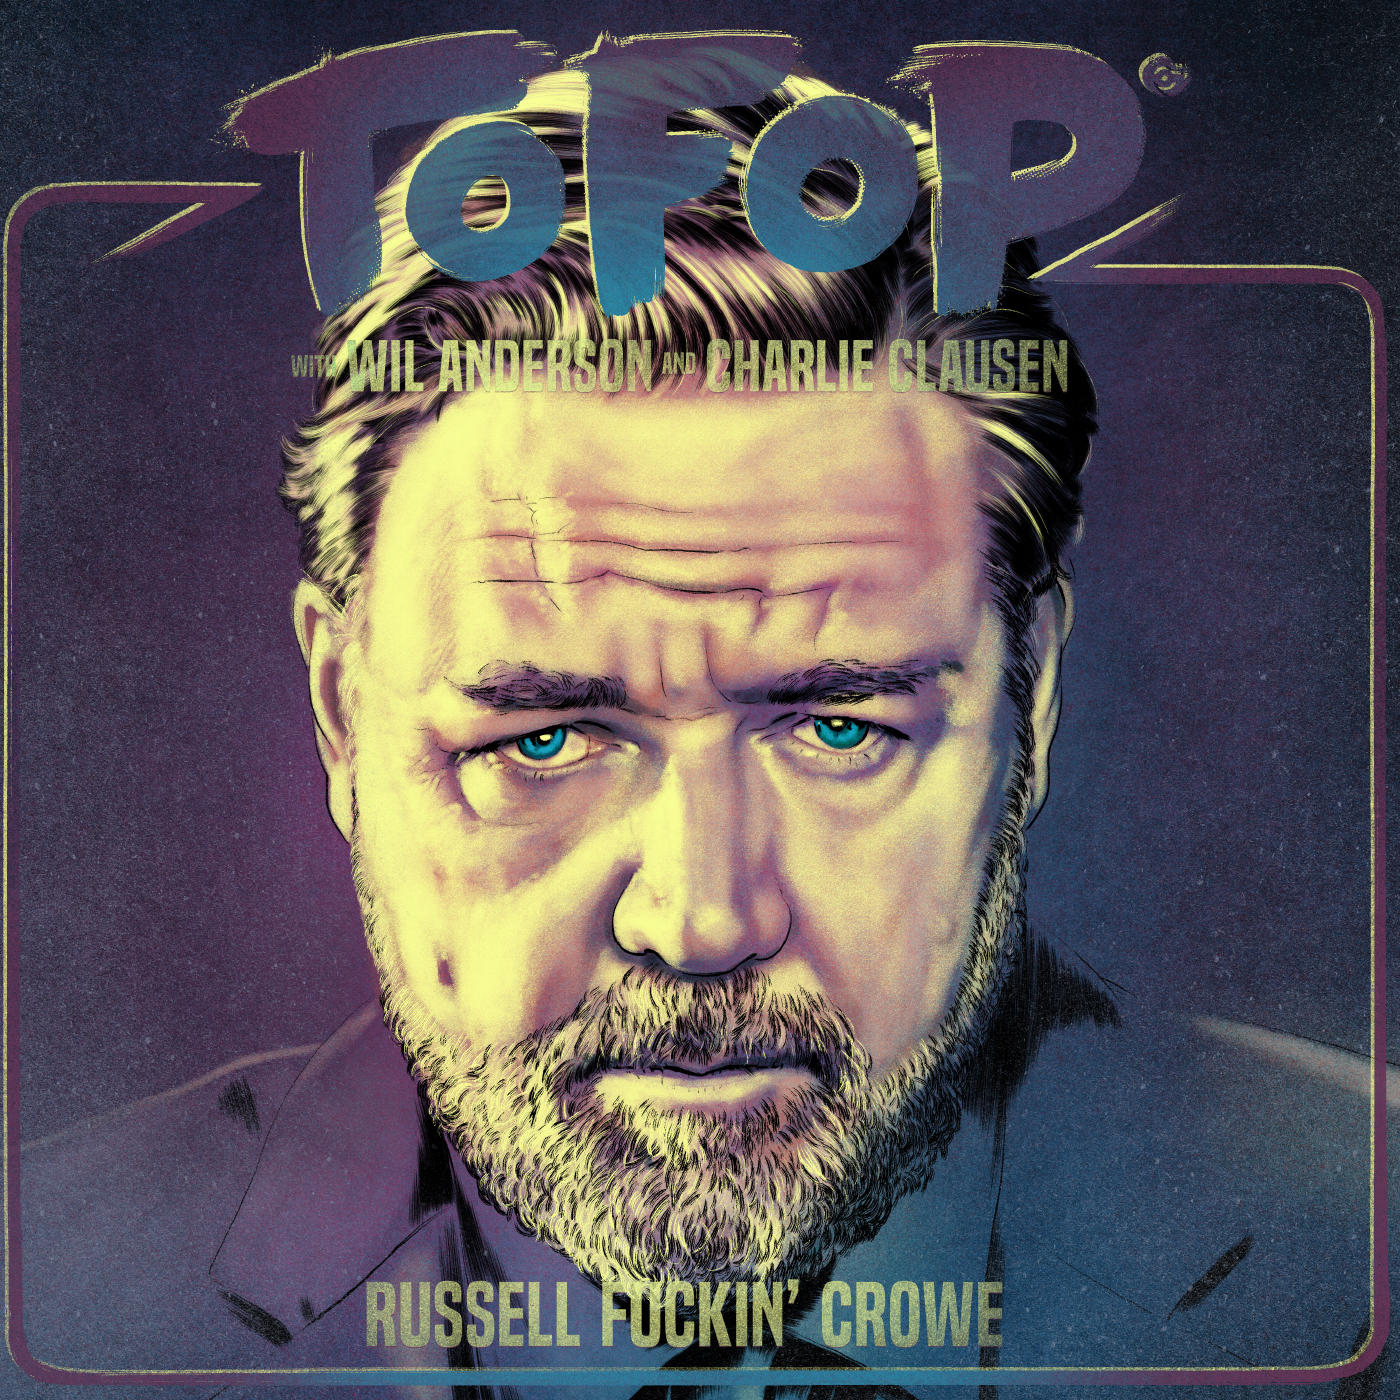 TOFOP: Russell Fuckin’ Crowe